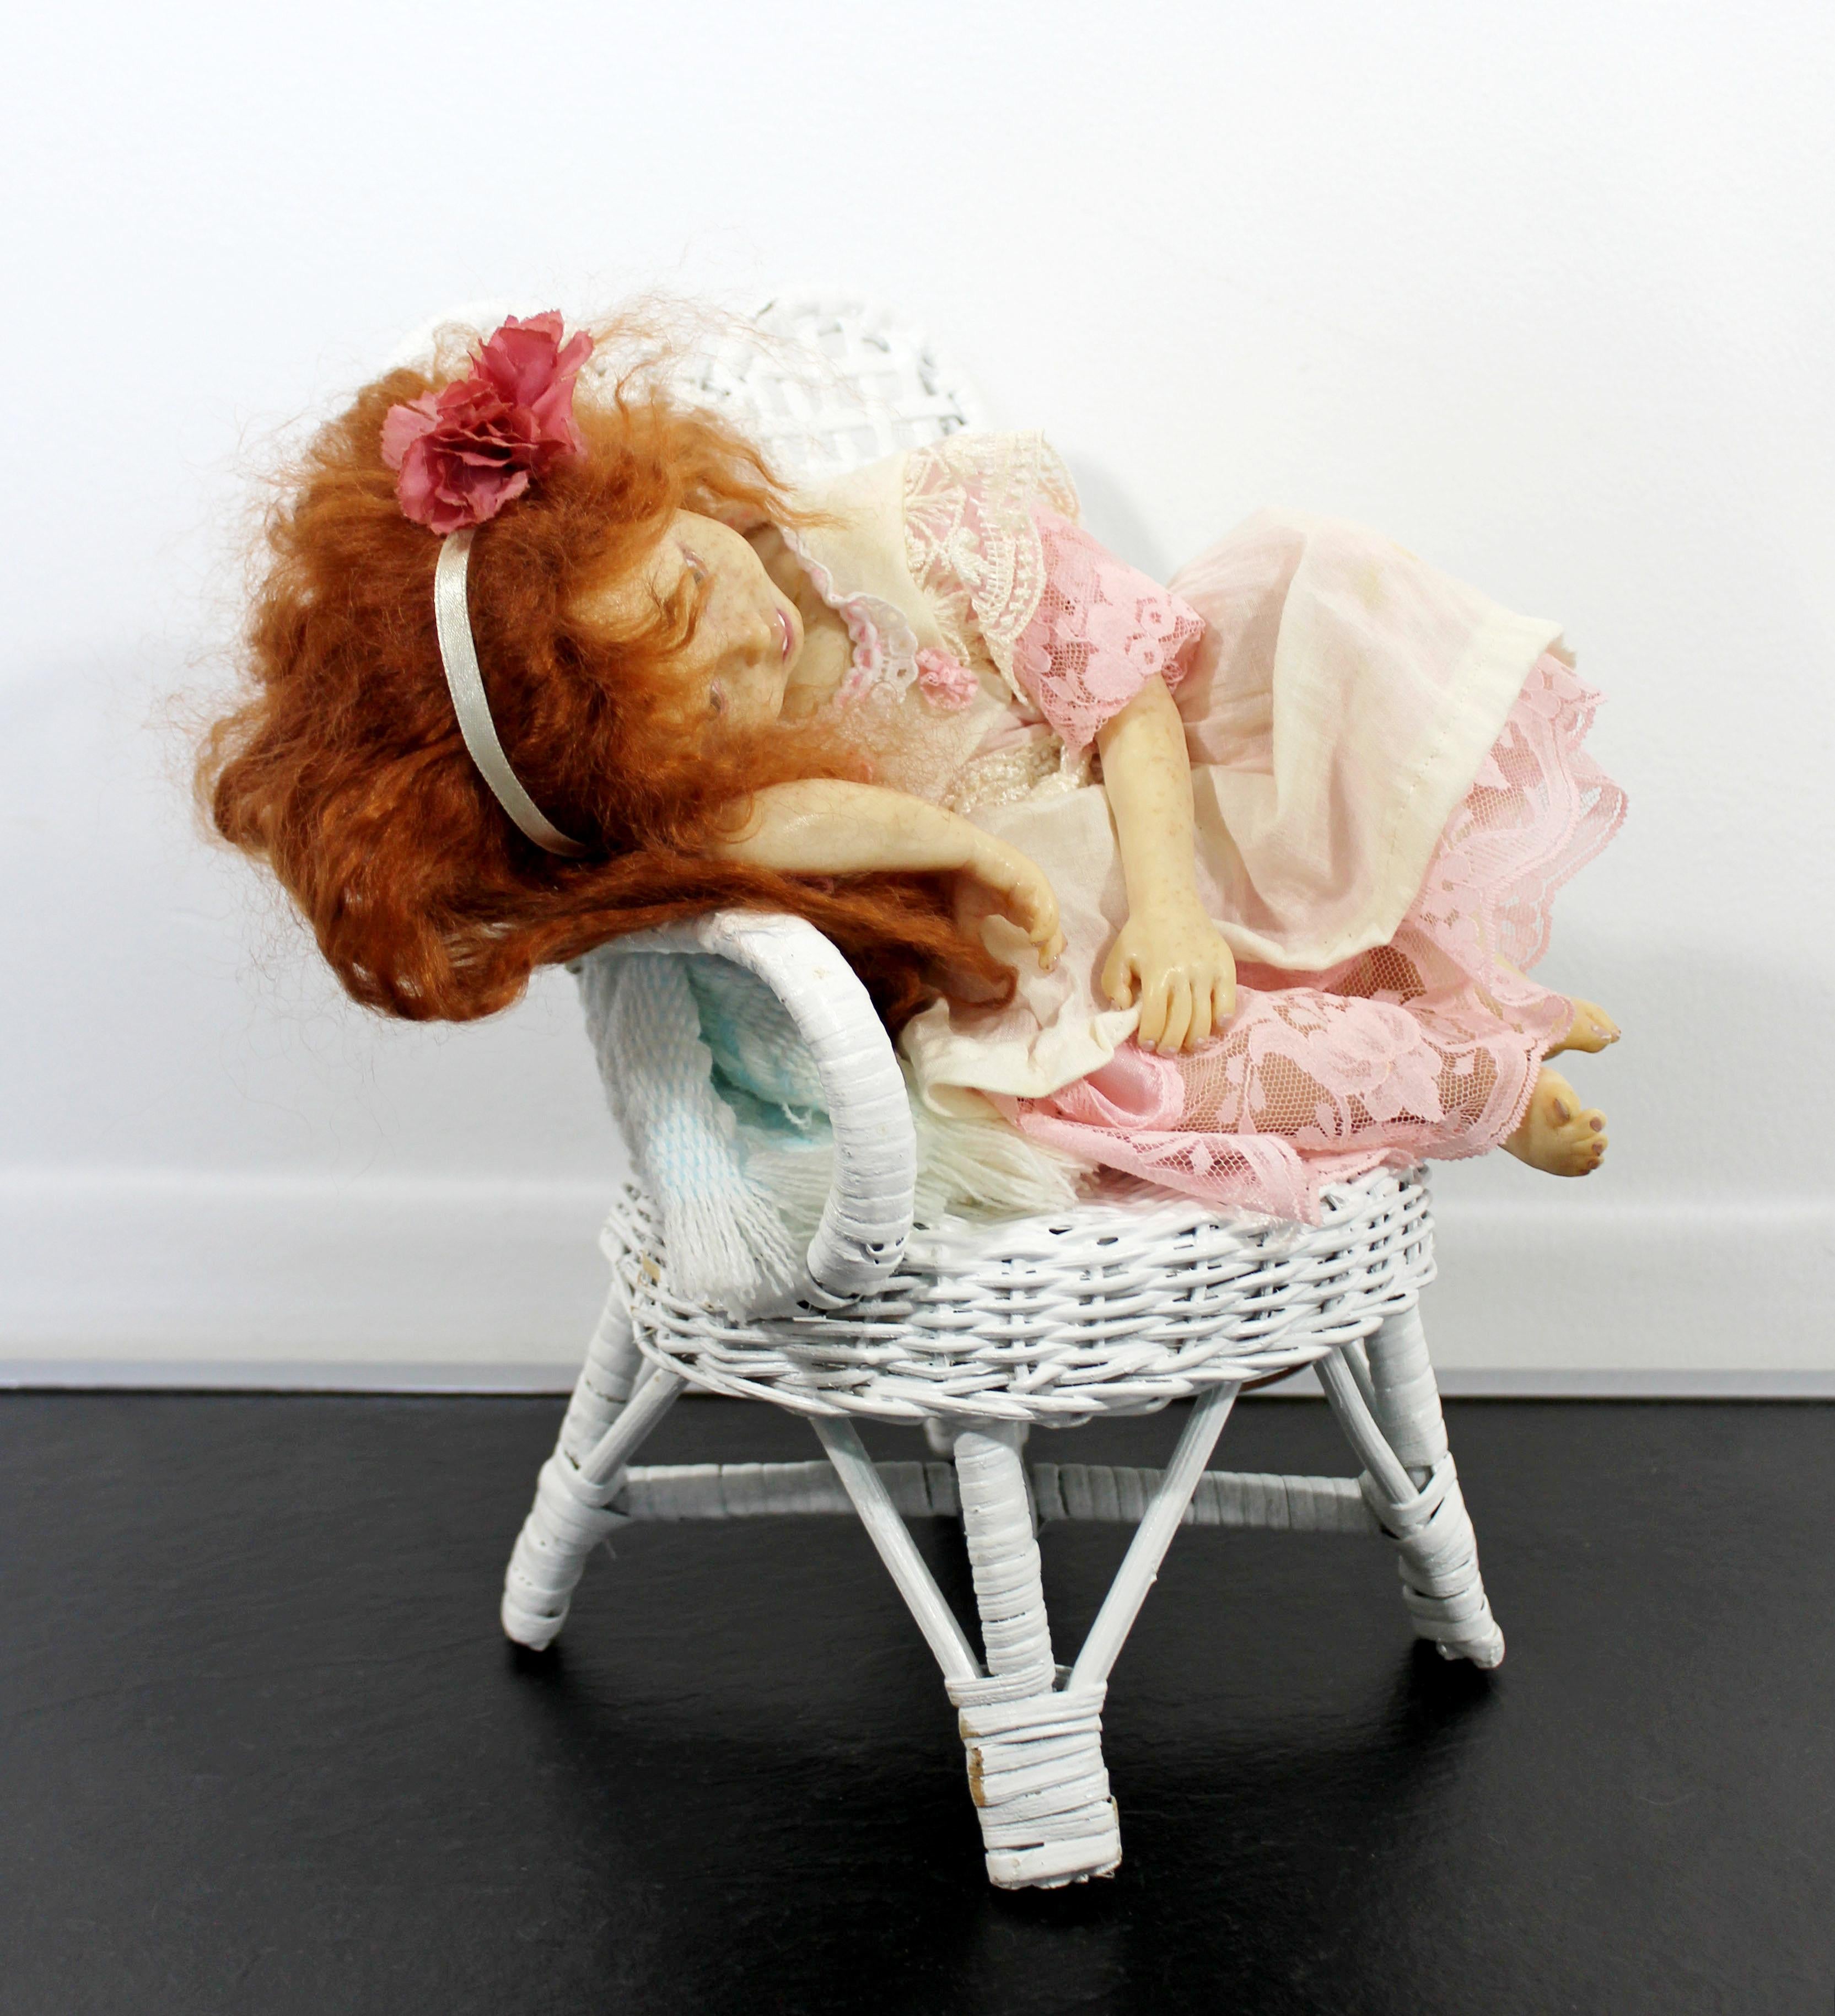 For your consideration is this polymer clay doll by Liz Shaw. Shaw's superb detail of sculpting, inset enamel eyes, original costume, with a wicker chair. In excellent condition. The dimensions are 9.5